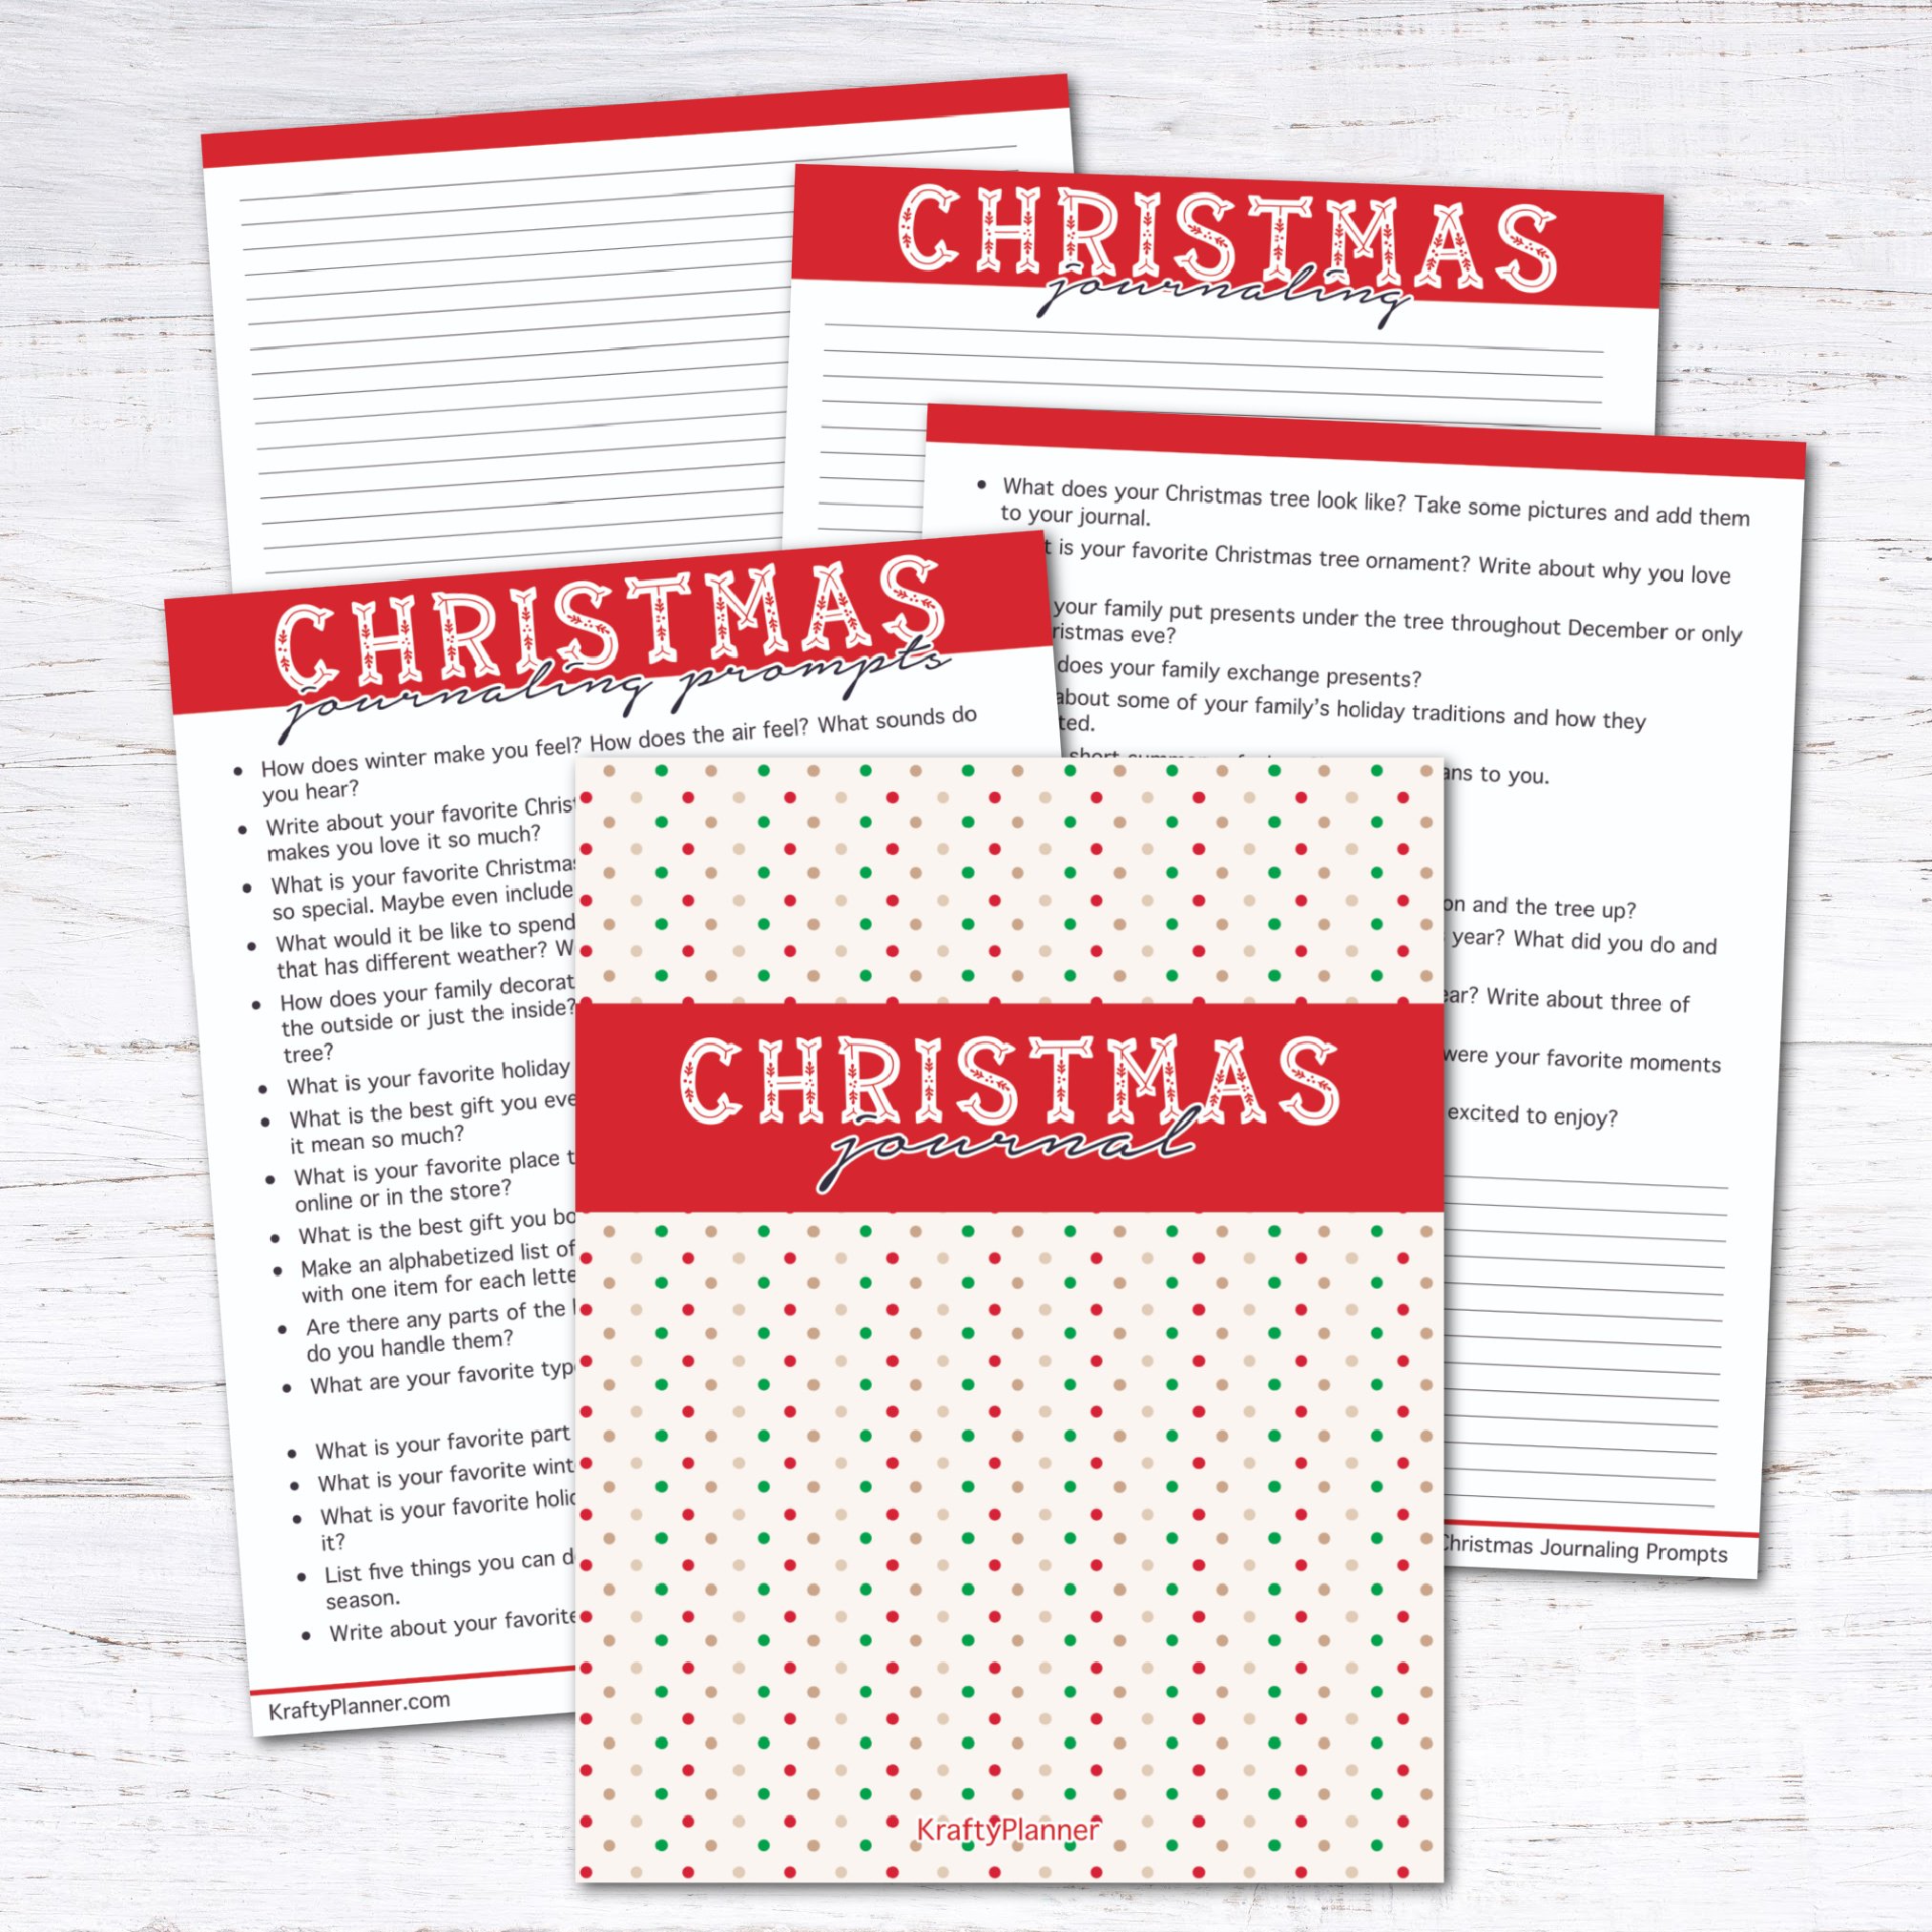 Christmas Journaling - 31 Prompts for the Holiday Season